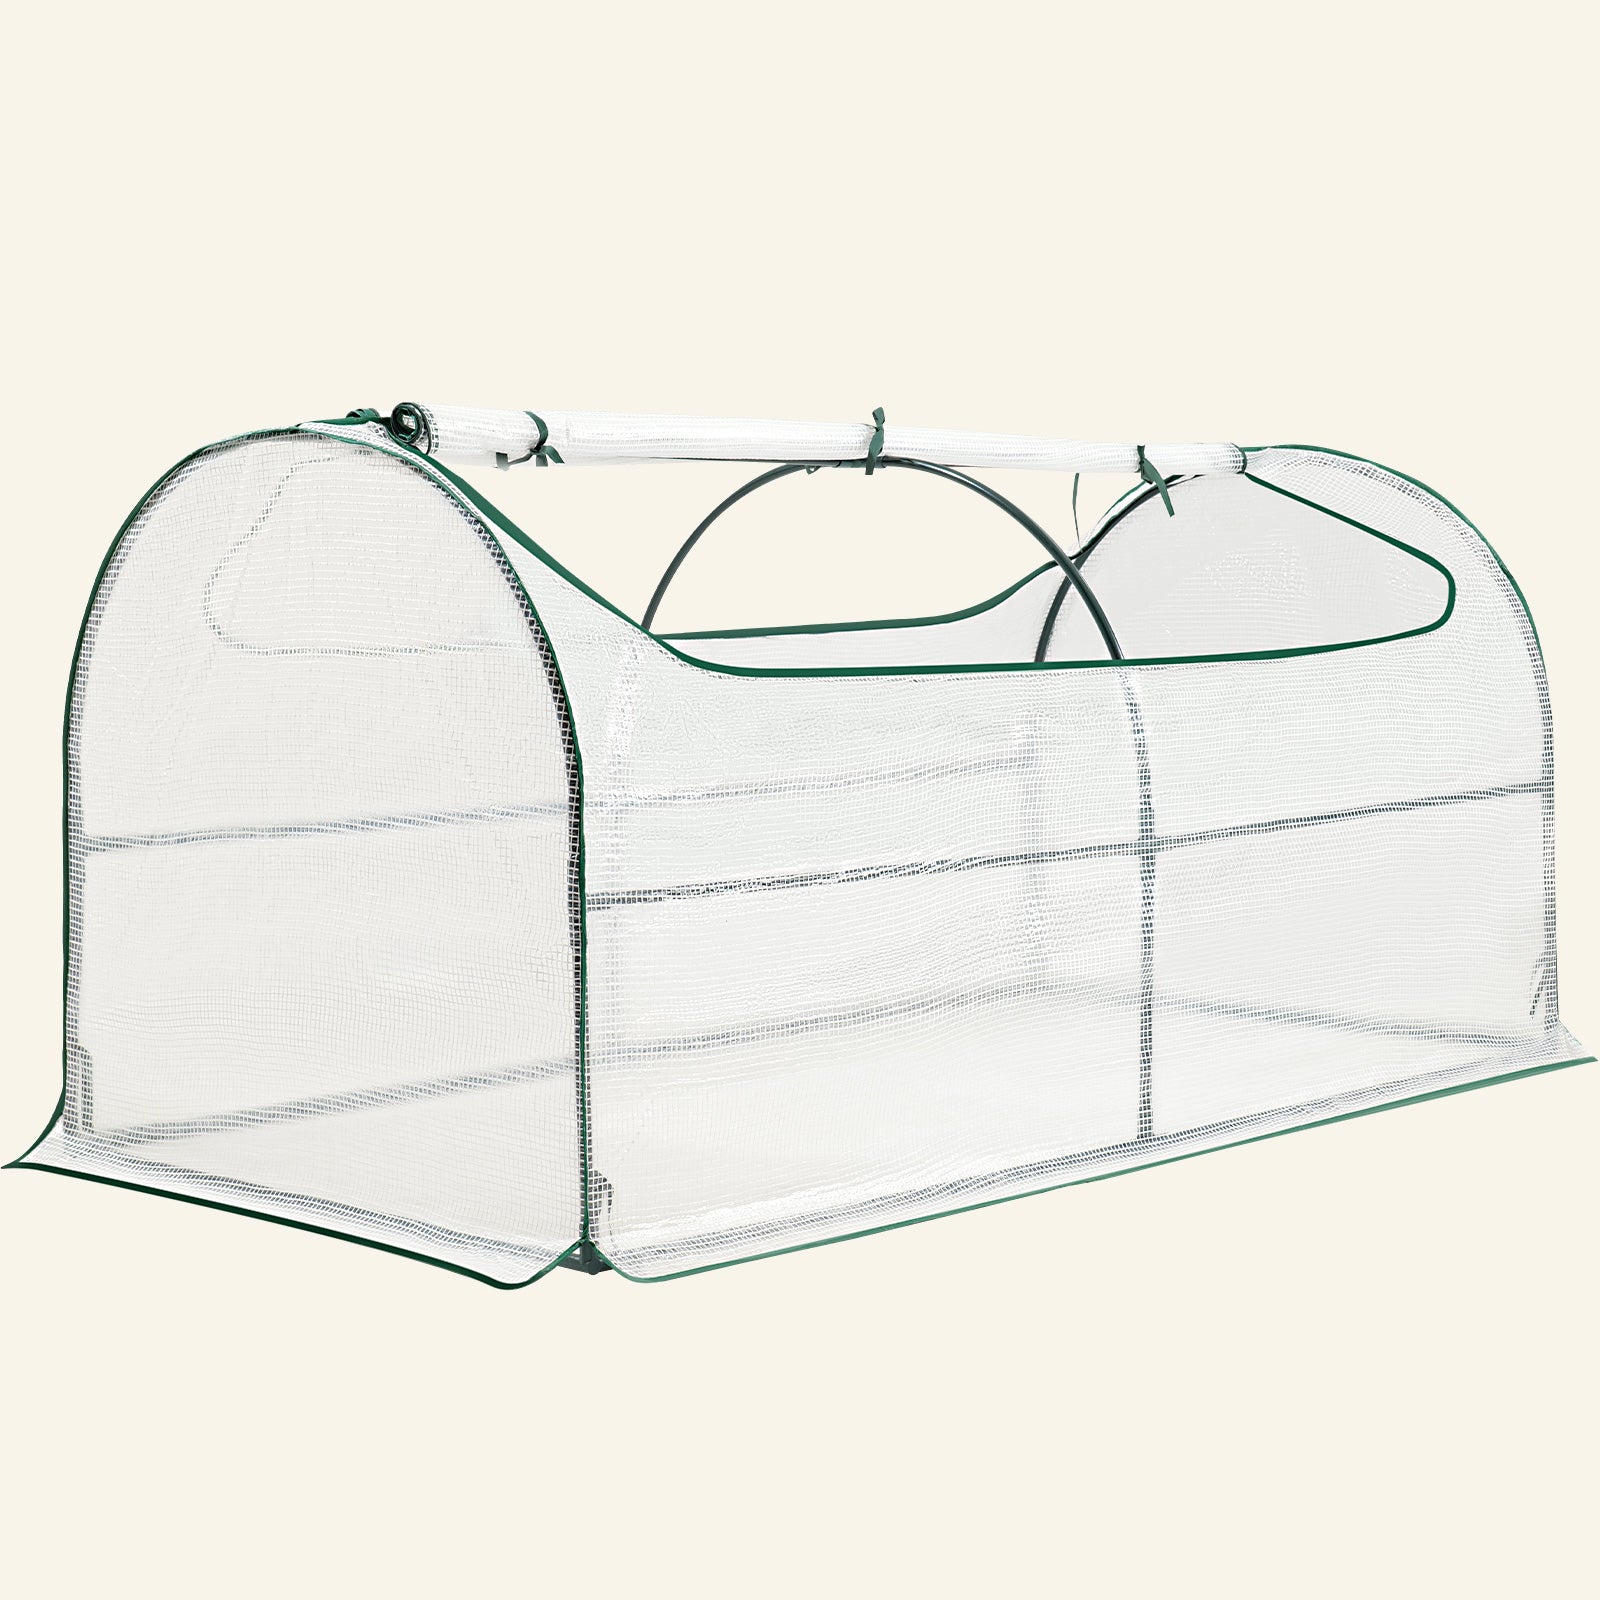 12" Tall Greenhouse for Oval Galvanized Raised Garden Bed